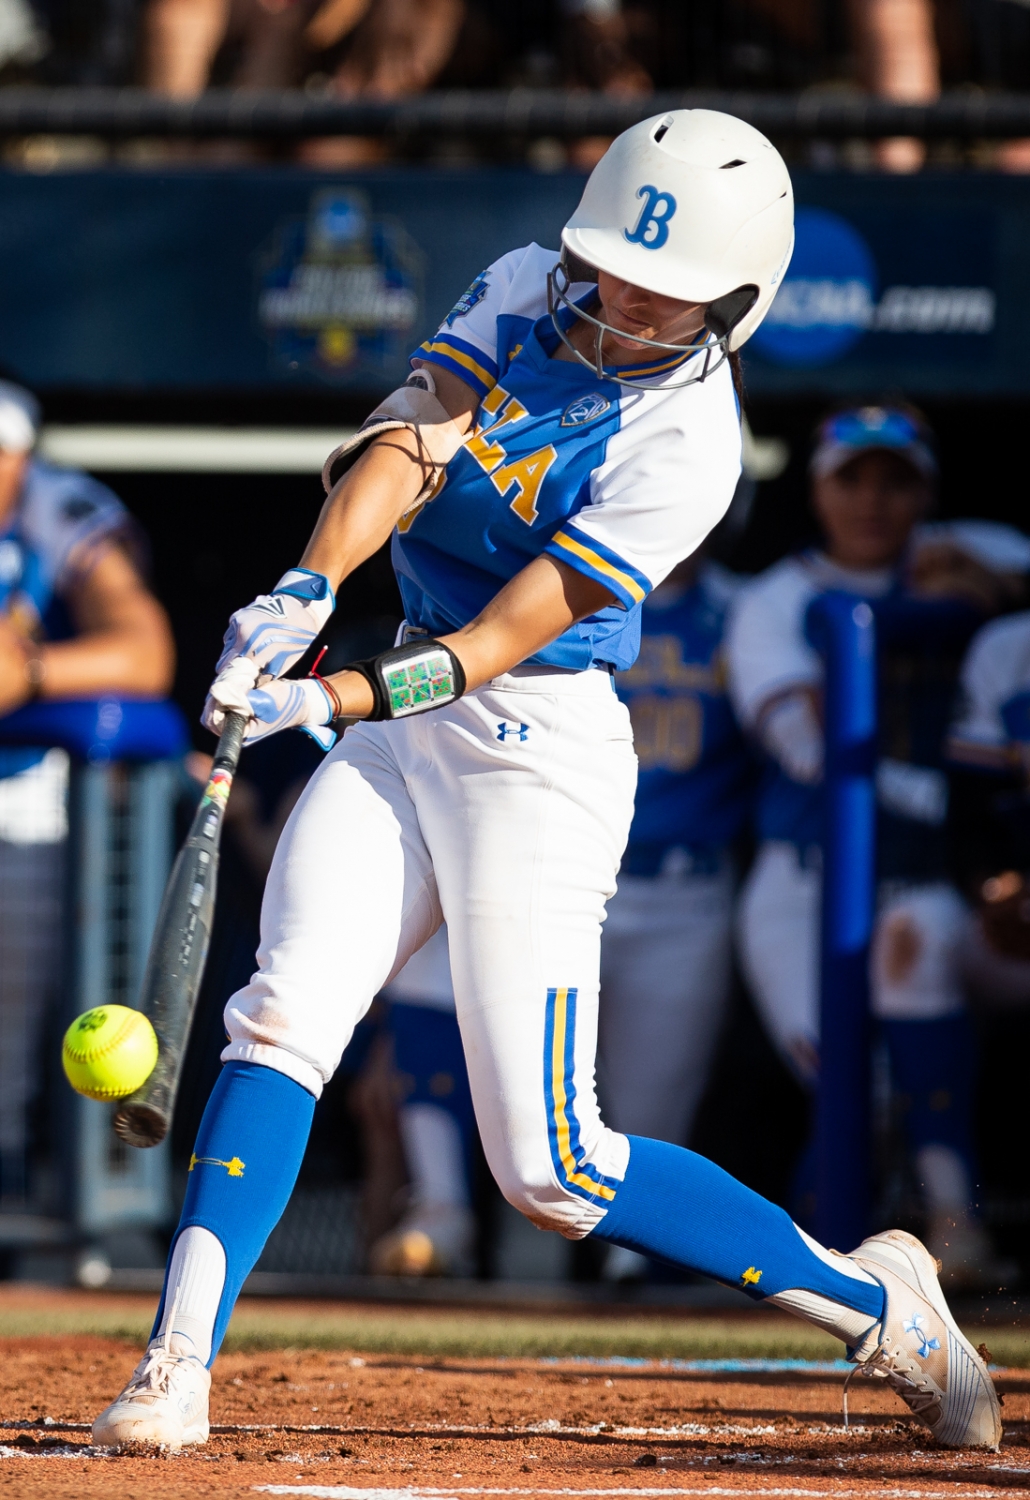 Gallery Softball claims UCLA’s 118th NCAA title with 54 victory over